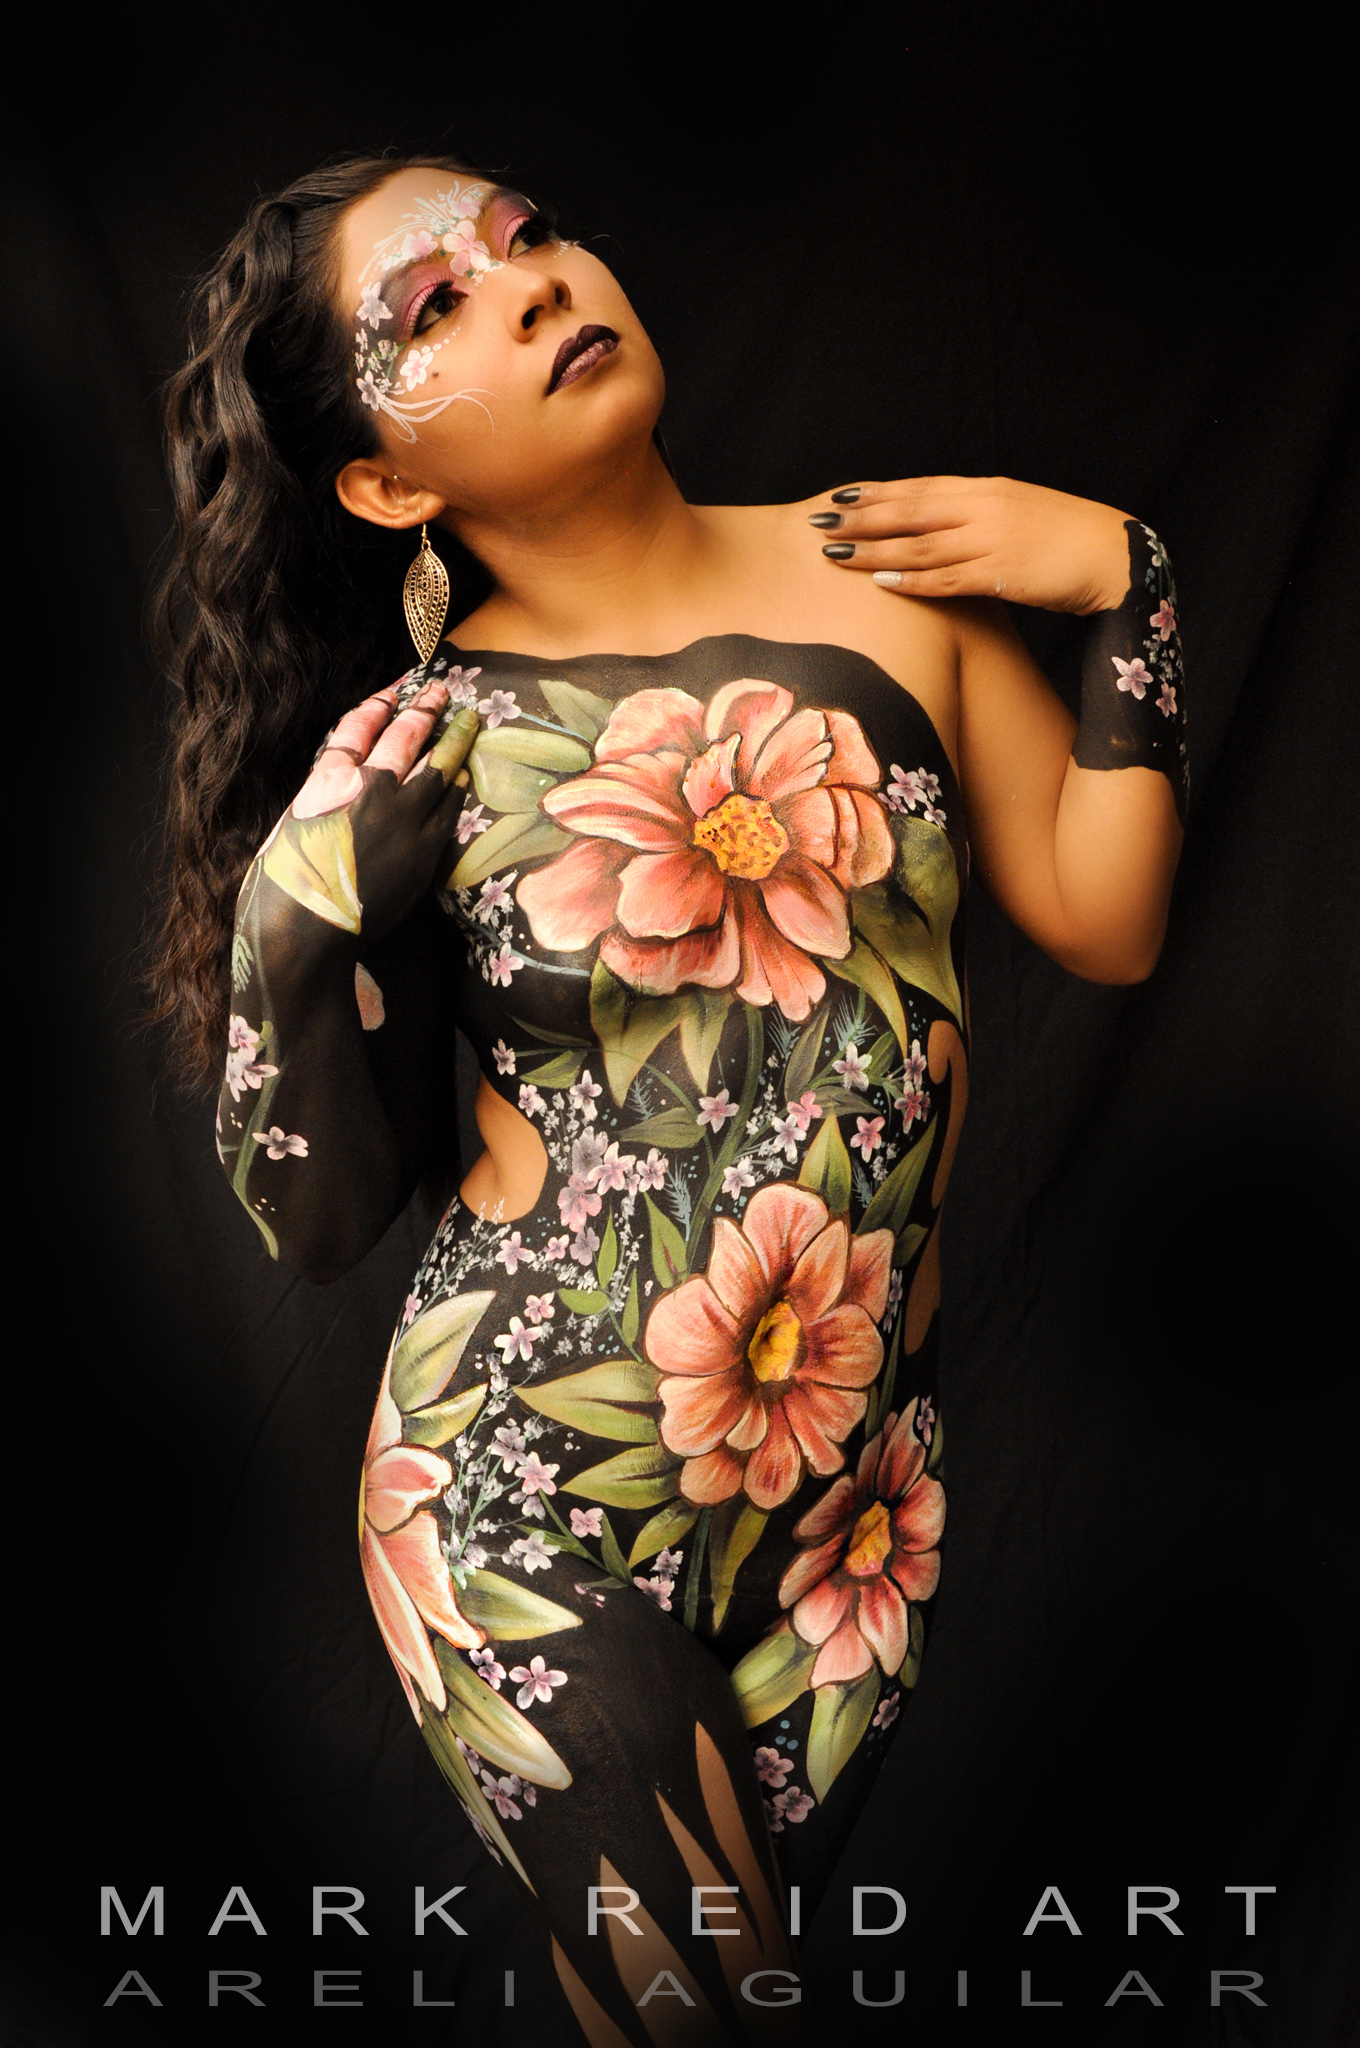 Beautiful Latina in a full body painting featuring light pink roses with a green behind them.